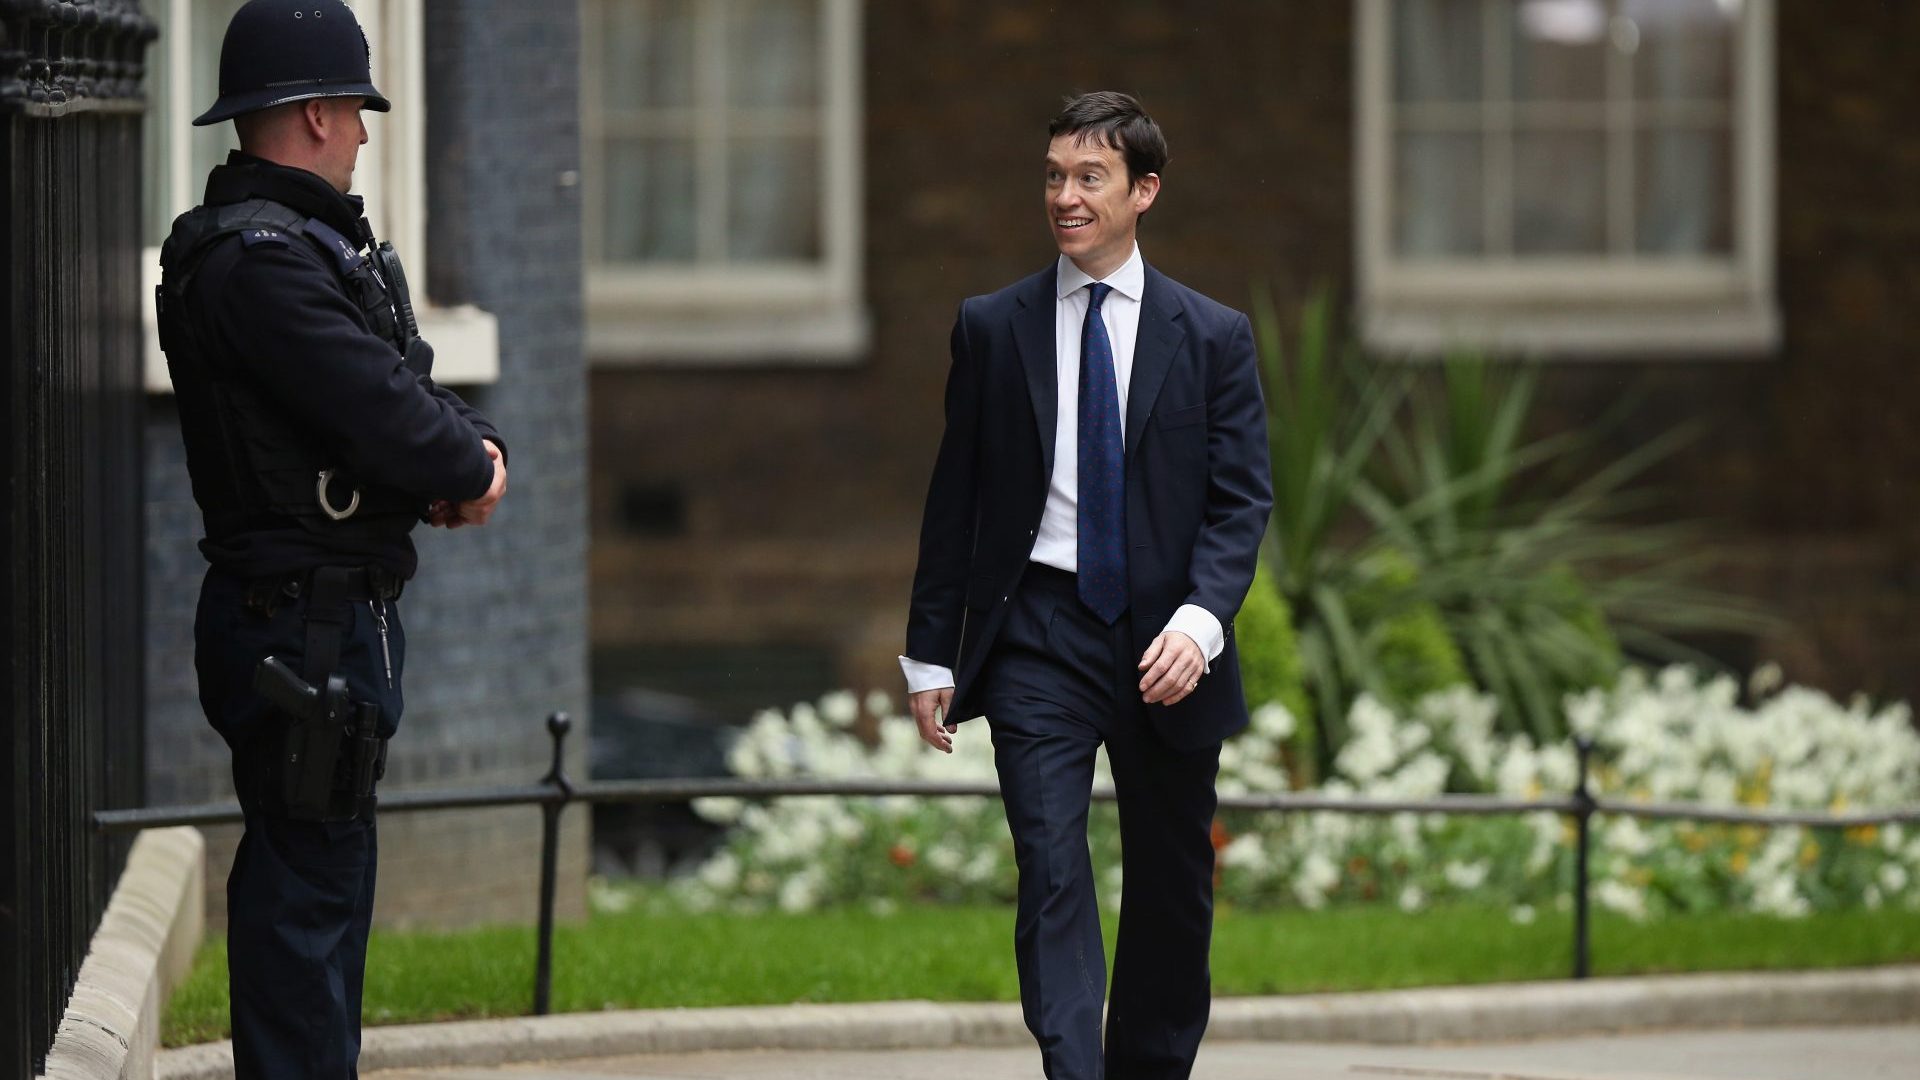 May 2015: Newly promoted minister Rory Stewart arrives for his first cabinet meeting at 10 Downing Street after the Tories’ general election victory the previous week. Photo: Dan Kitwood/Getty